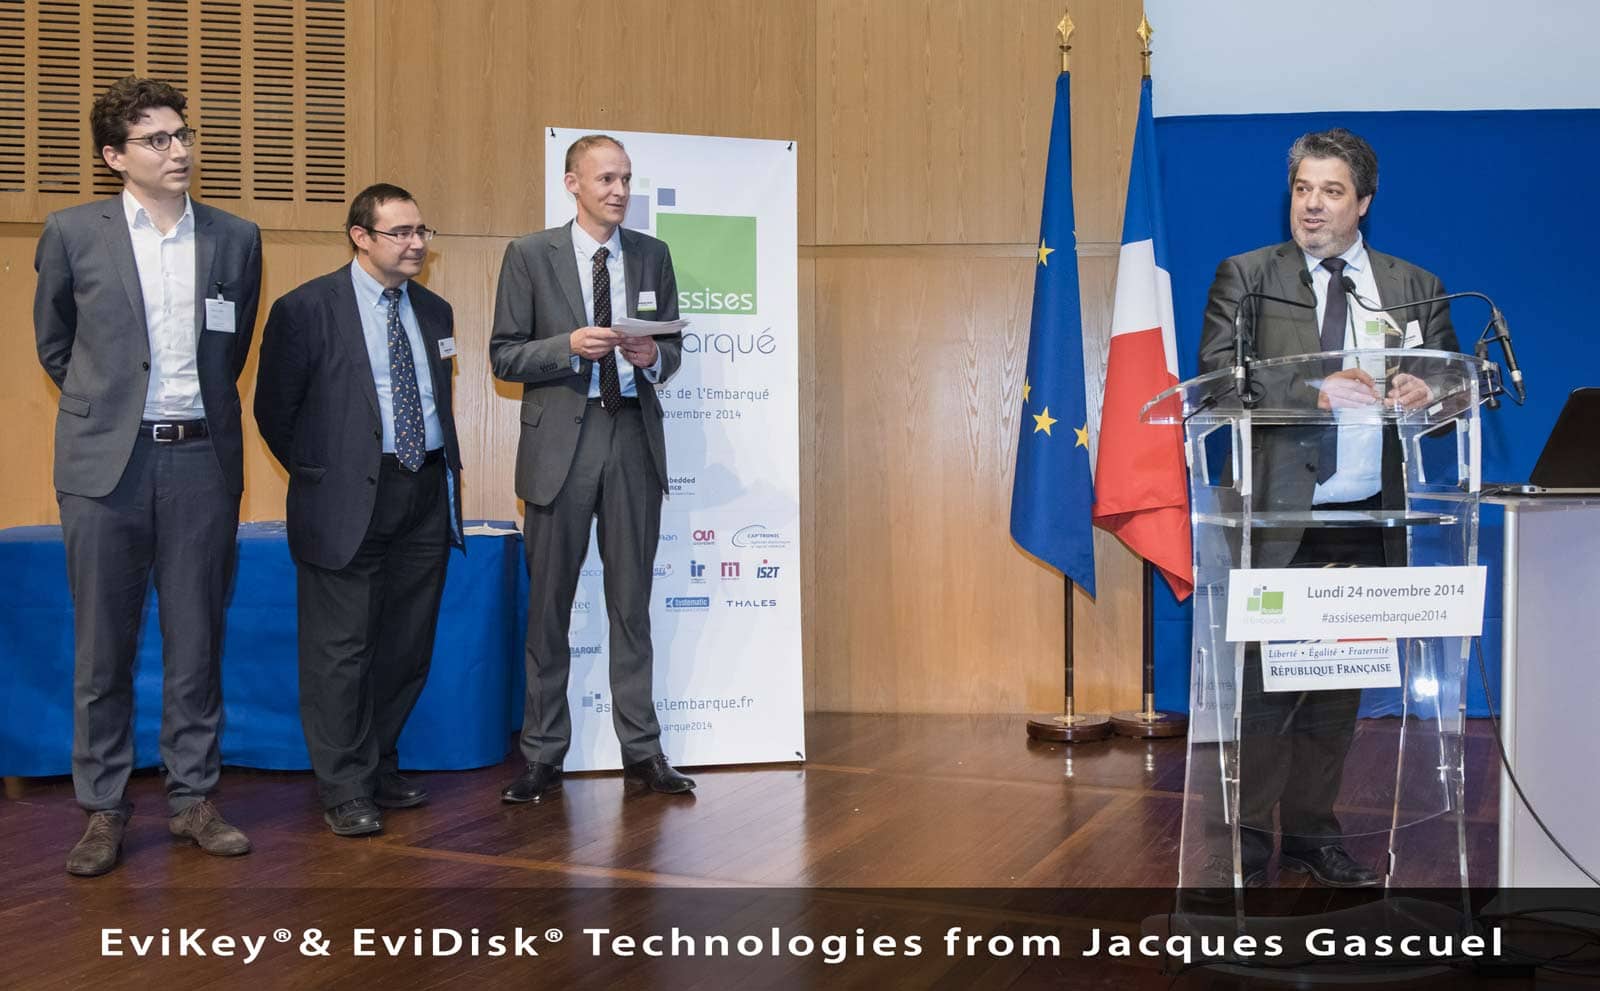 NFC hardened USB stick EviKey & NFC hardened EviDisk unlockable contactless via nfc phone Award 2014 embedded system Bercy Paris from Jacques Gascuel by Freemindtronic Andorra